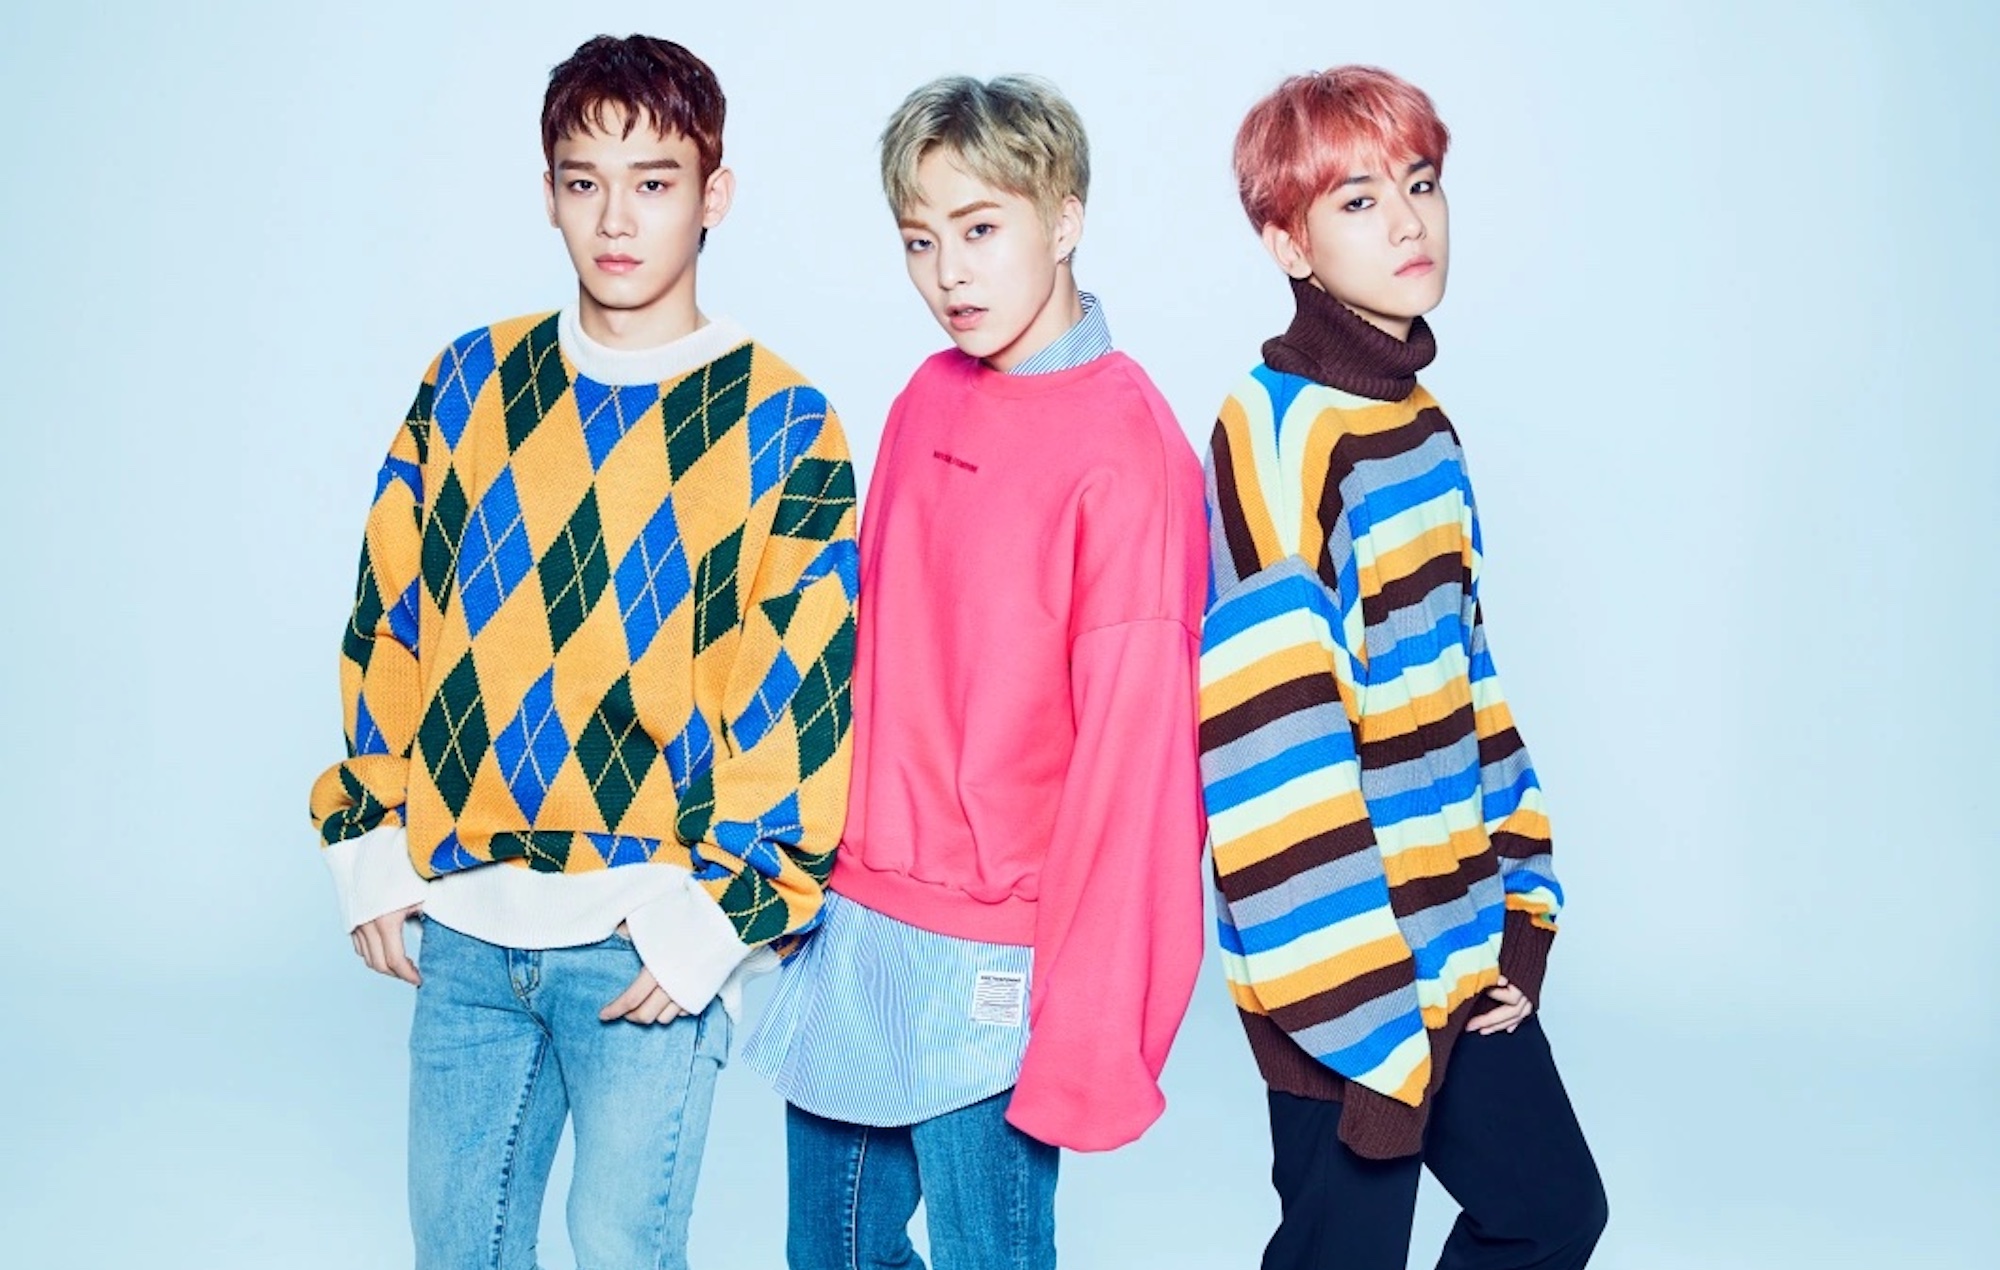 SM Entertainment refutes claims by EXO’s Baekhyun, Xiumin and Chen